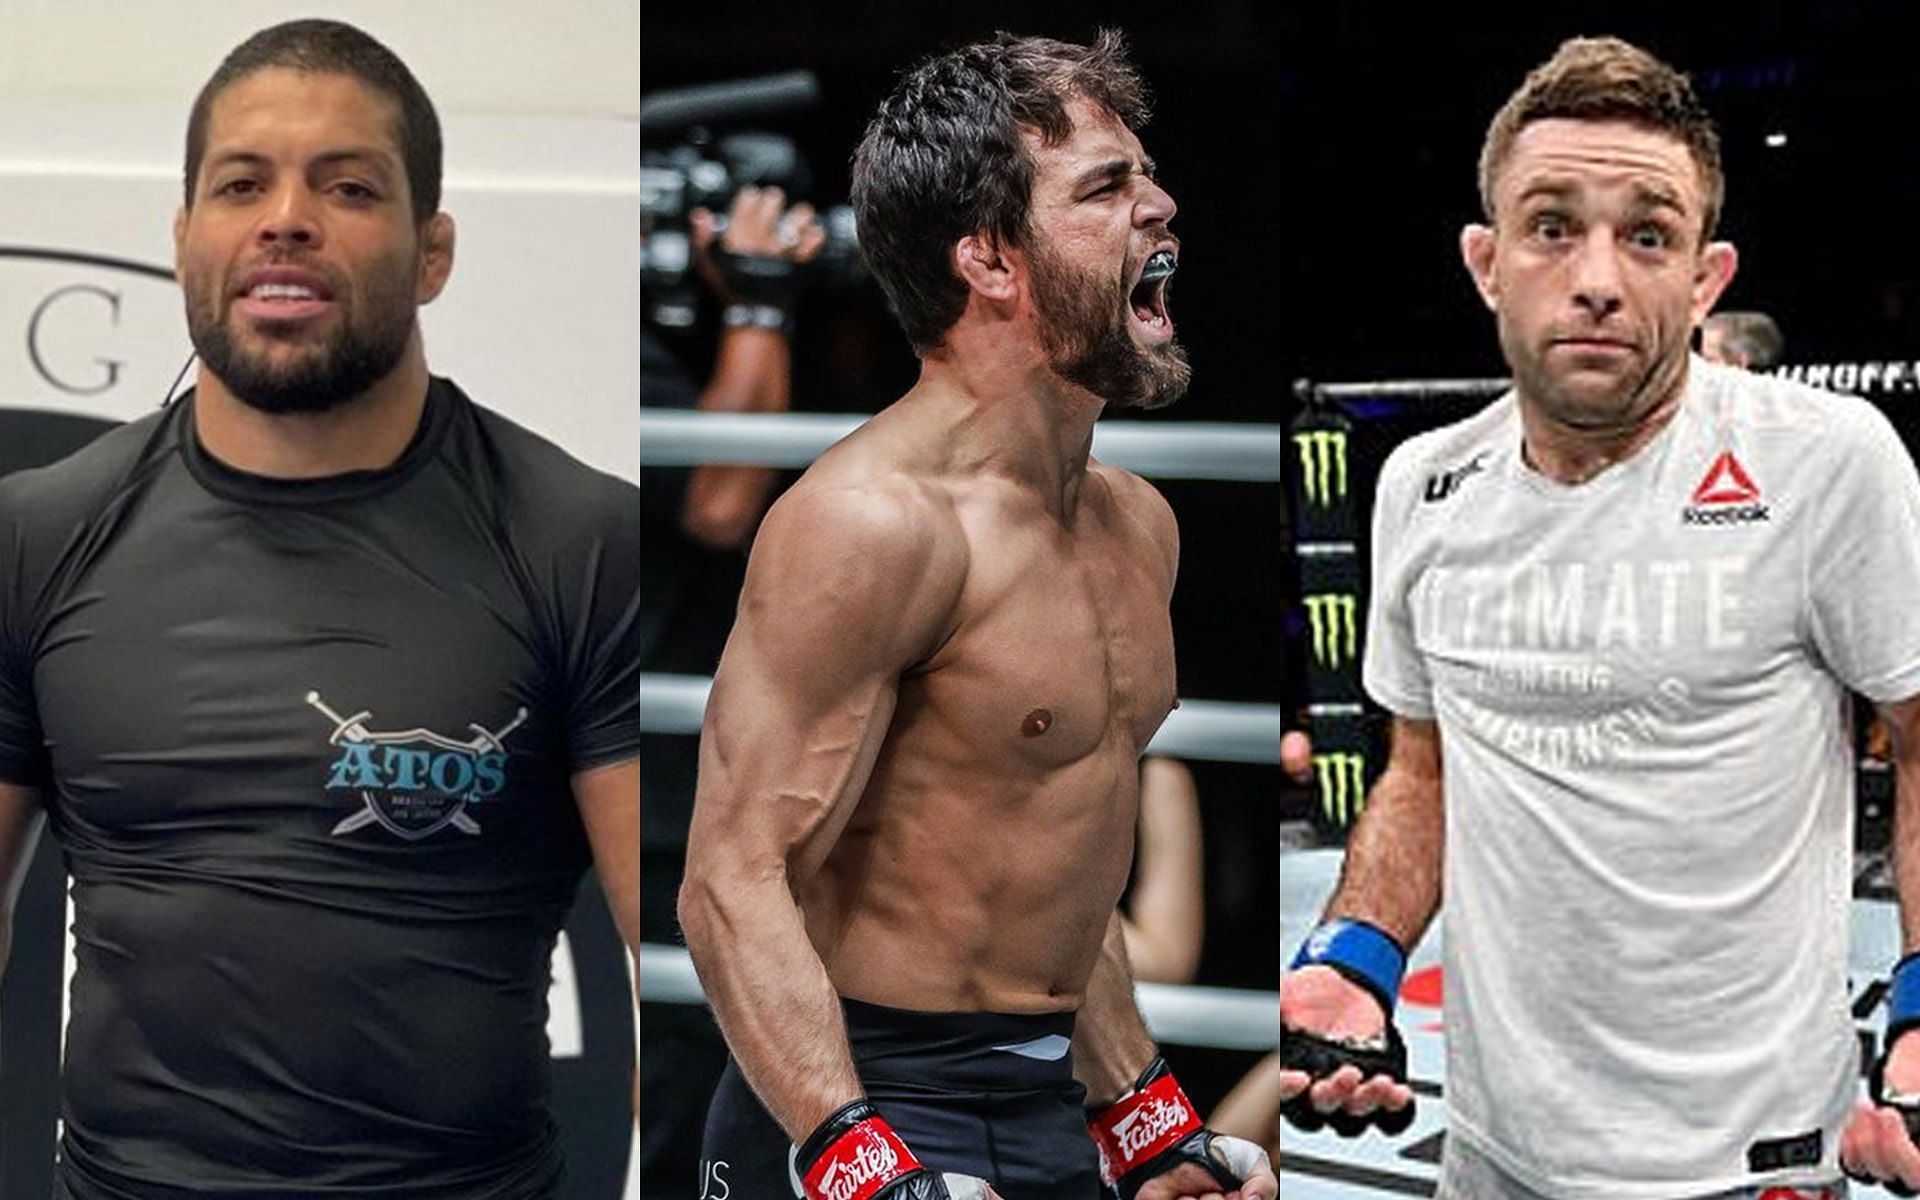 Andre Galvao (L) understands both sides of Garry Tonon (C) and Ryan Hall (R). | [Photos: ONE Championship/Sherdog]